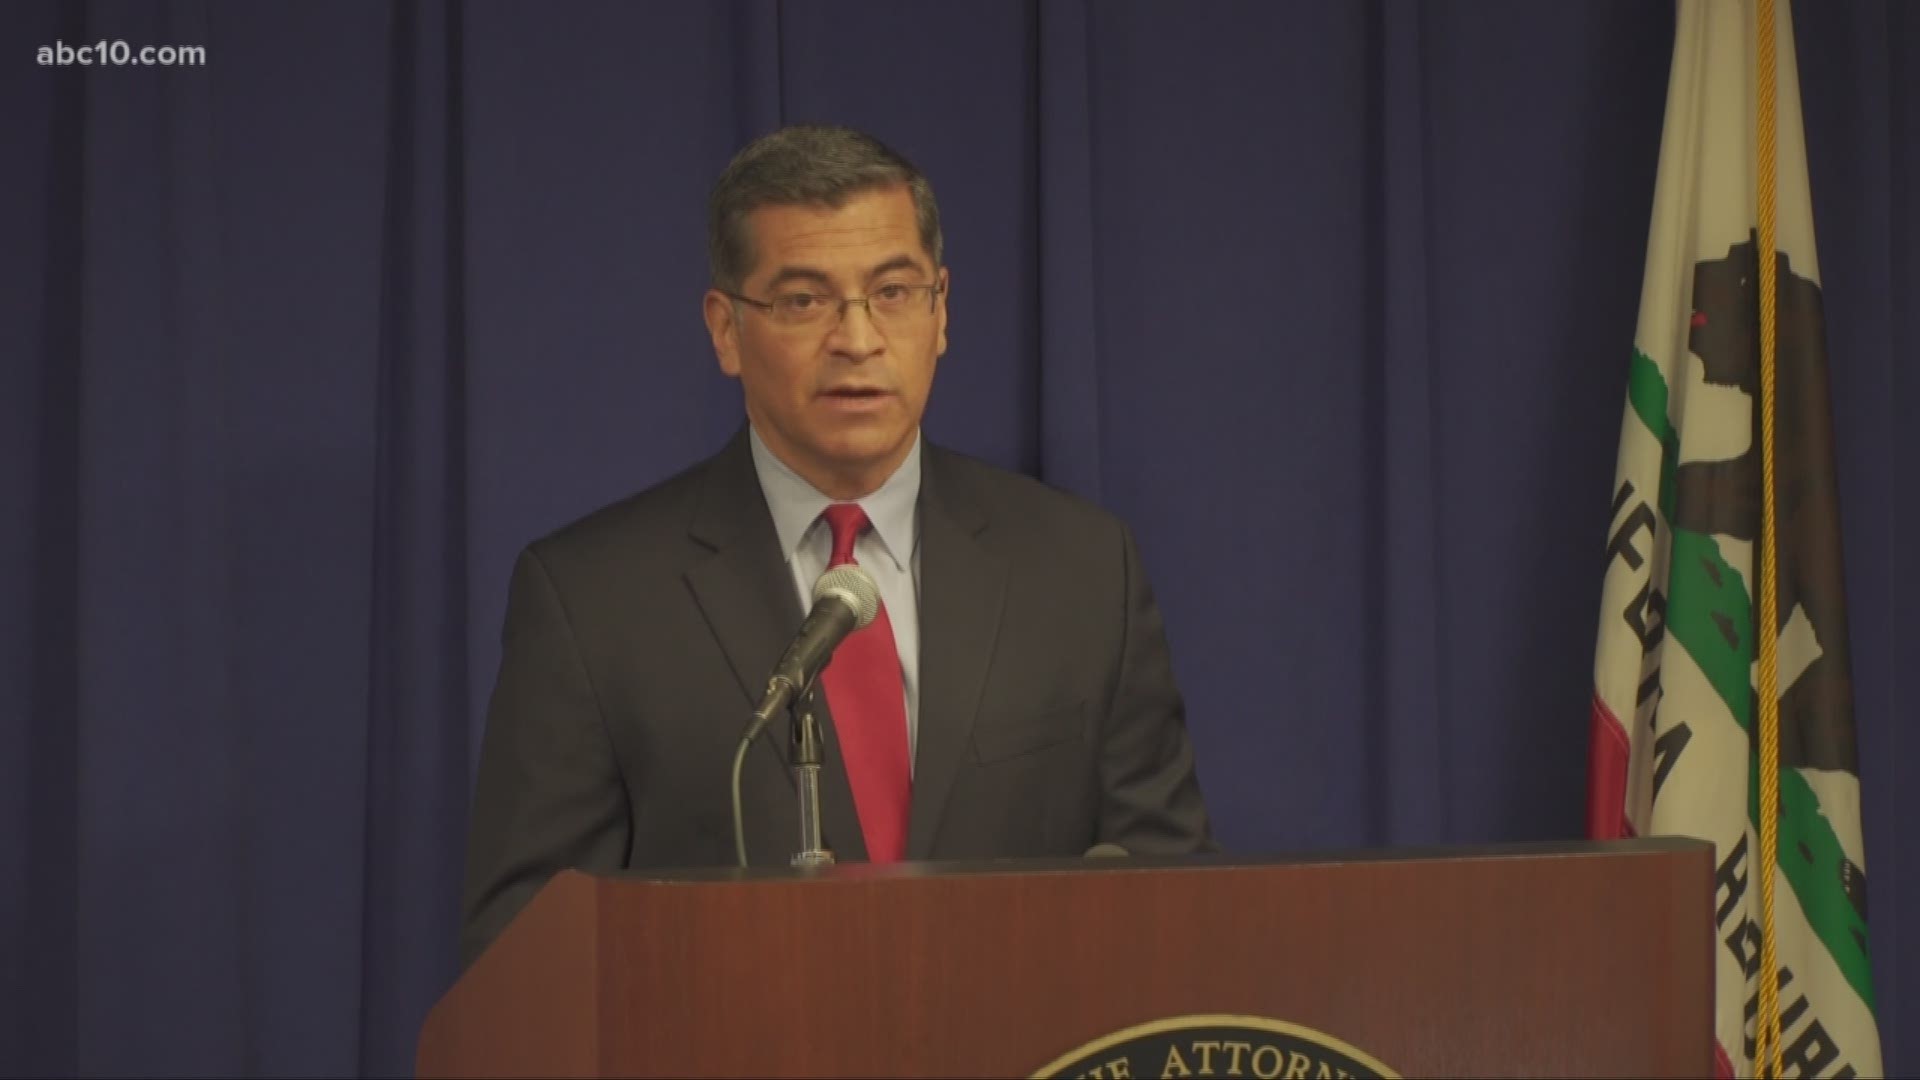 Nearly a year after of the shooting death of Stephon Clark, California Attorney General Xavier Becerra announced the results of his independent investigation. Becerra explained he will not charge the two officers involved because evidence revealed they believed they were in danger when they shot and killed the 22-year-old.